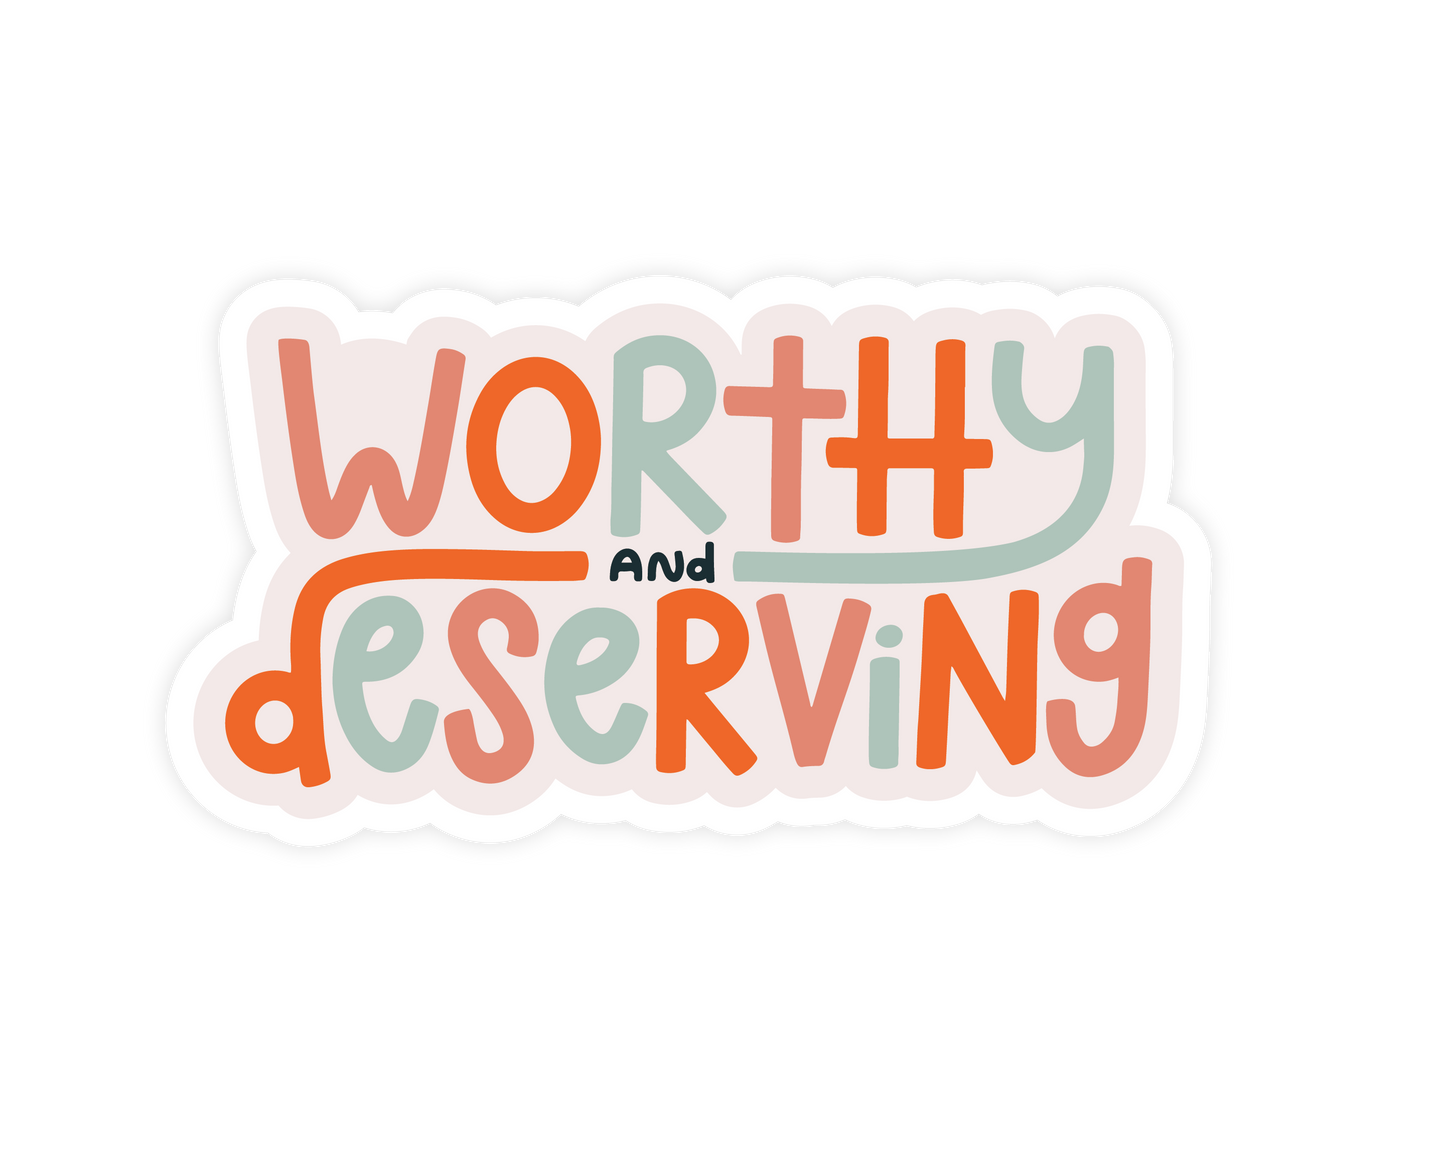 Worthy and Deserving Sticker